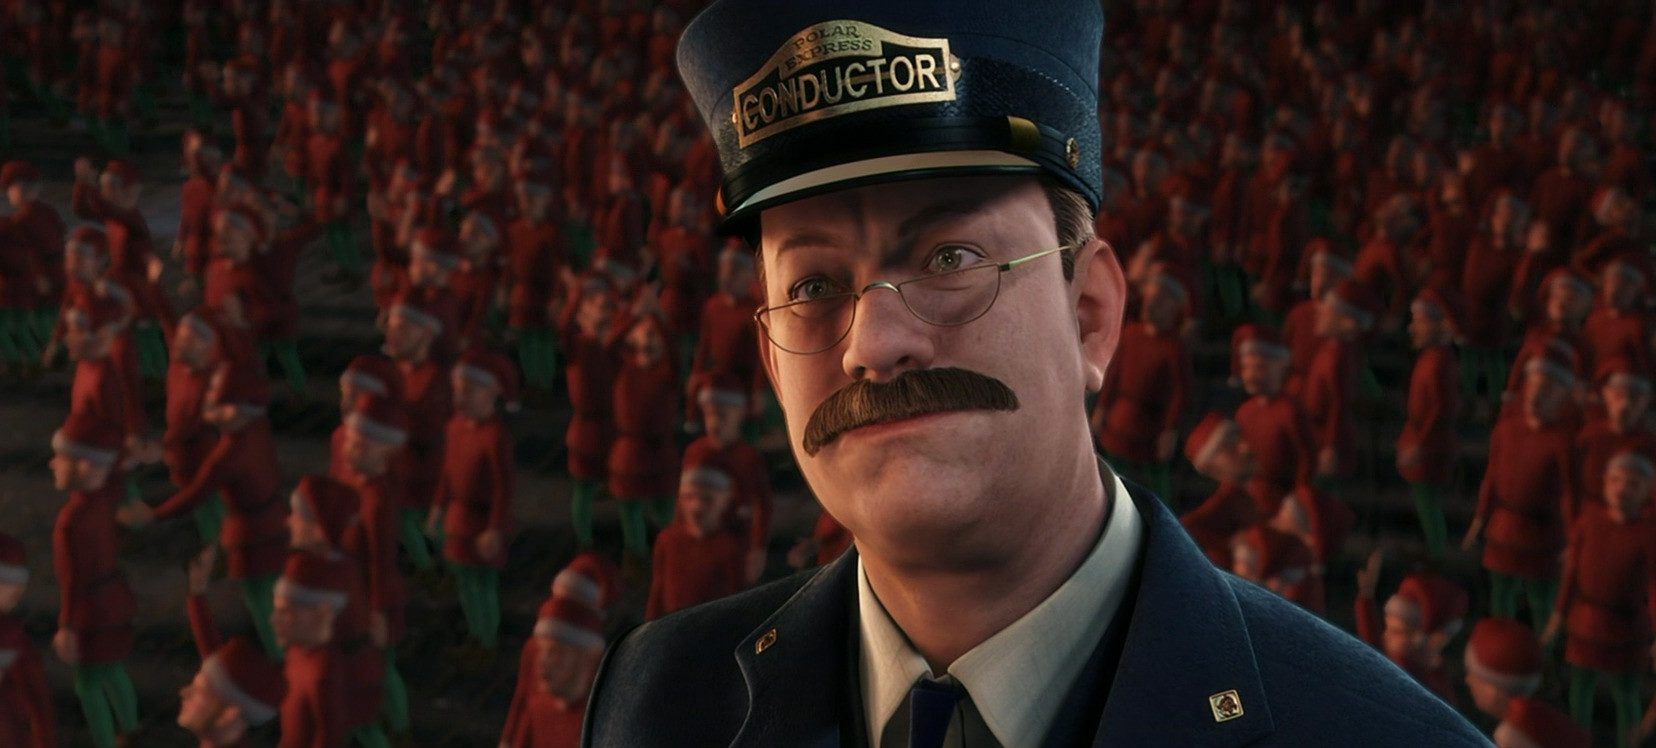 Tom Hanks as the conductor smiling in front of elves in The Polar Express